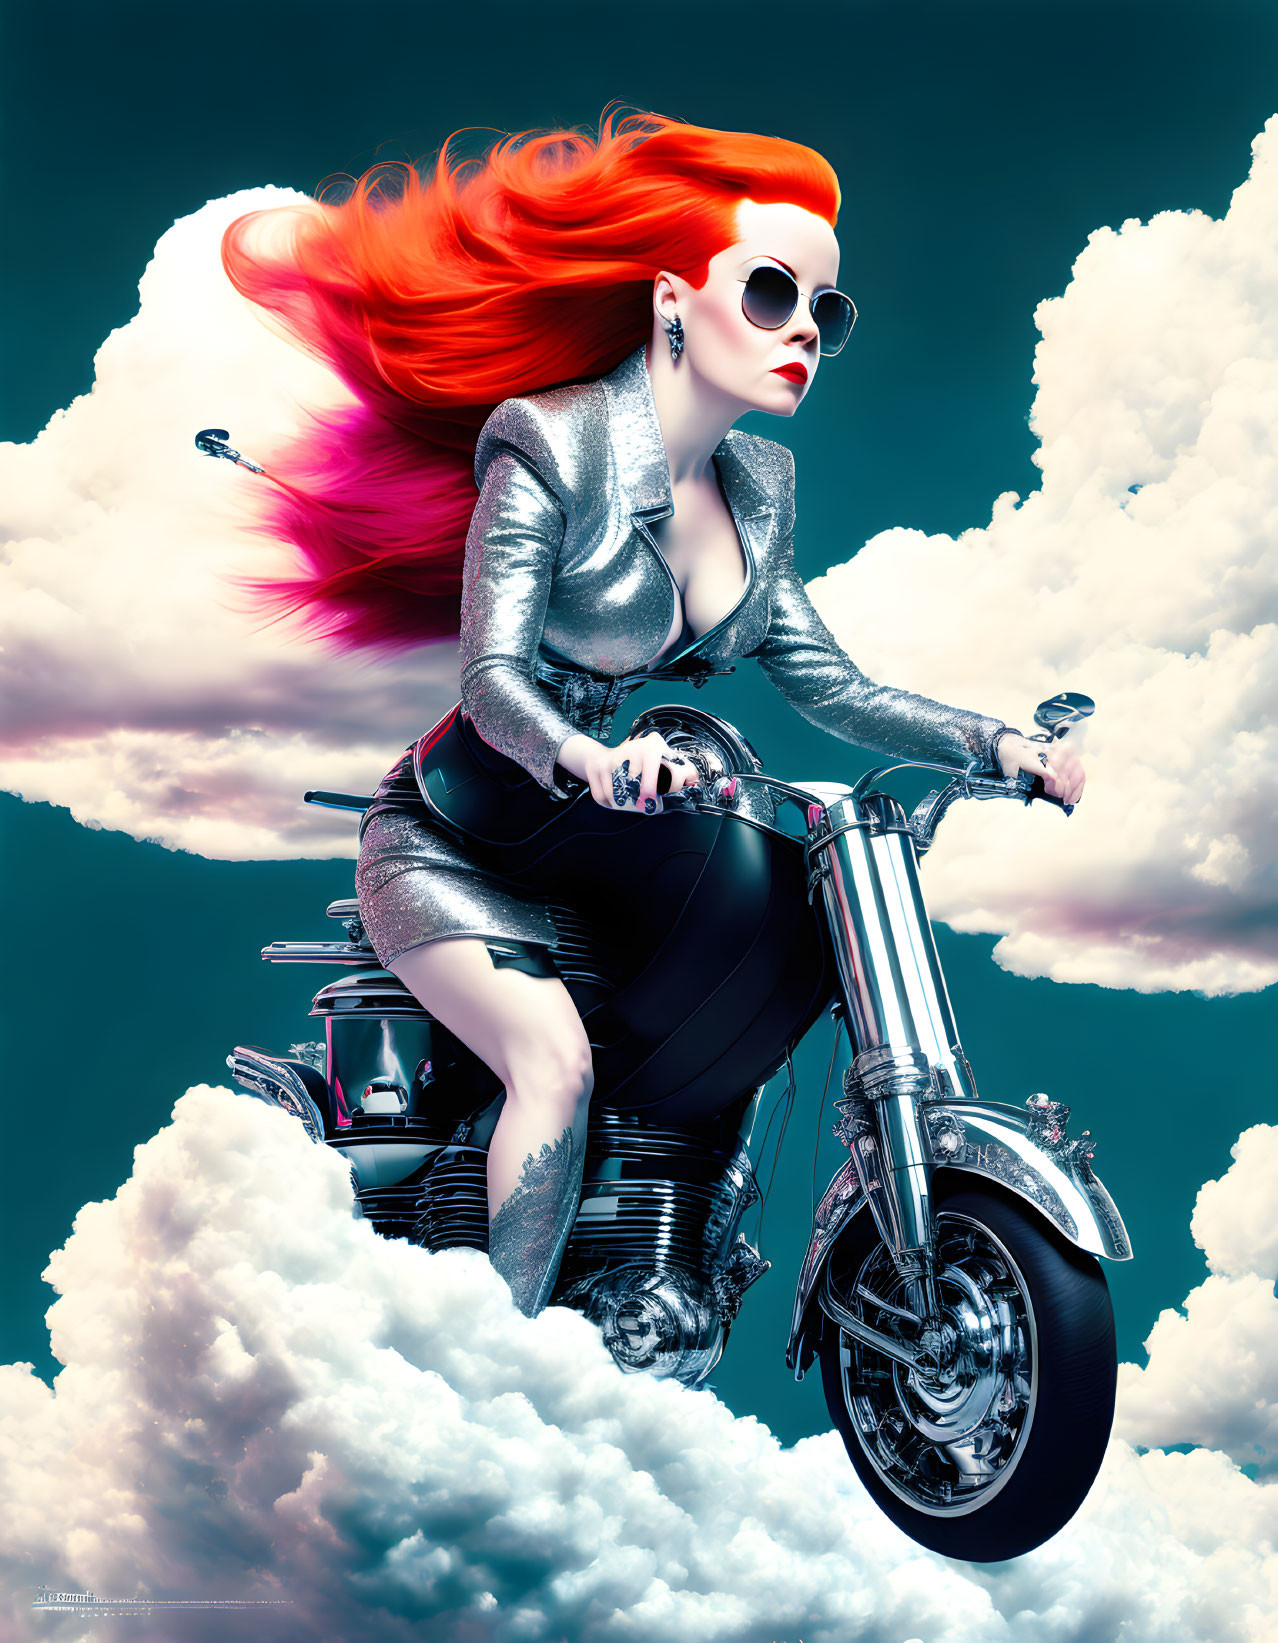 Red-haired woman on motorcycle in clouds with futuristic attire